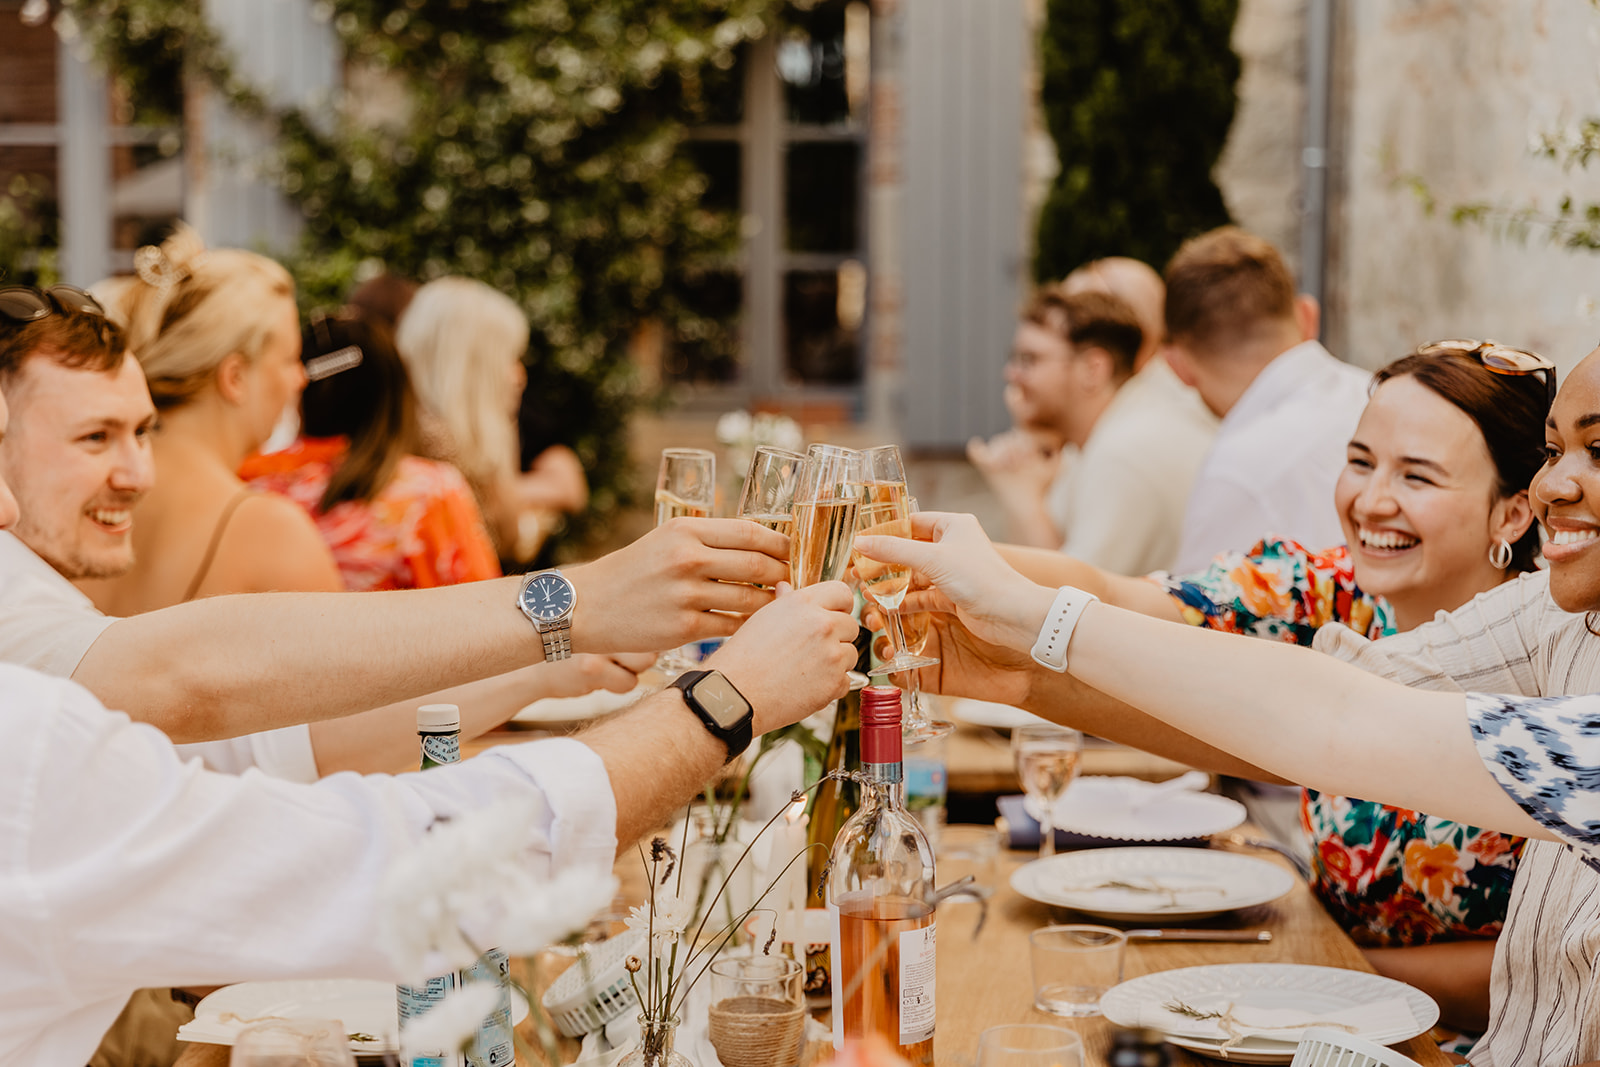 Guests toasting at reception at a France Destination Wedding. Photography and Videography by Olive Joy Photography